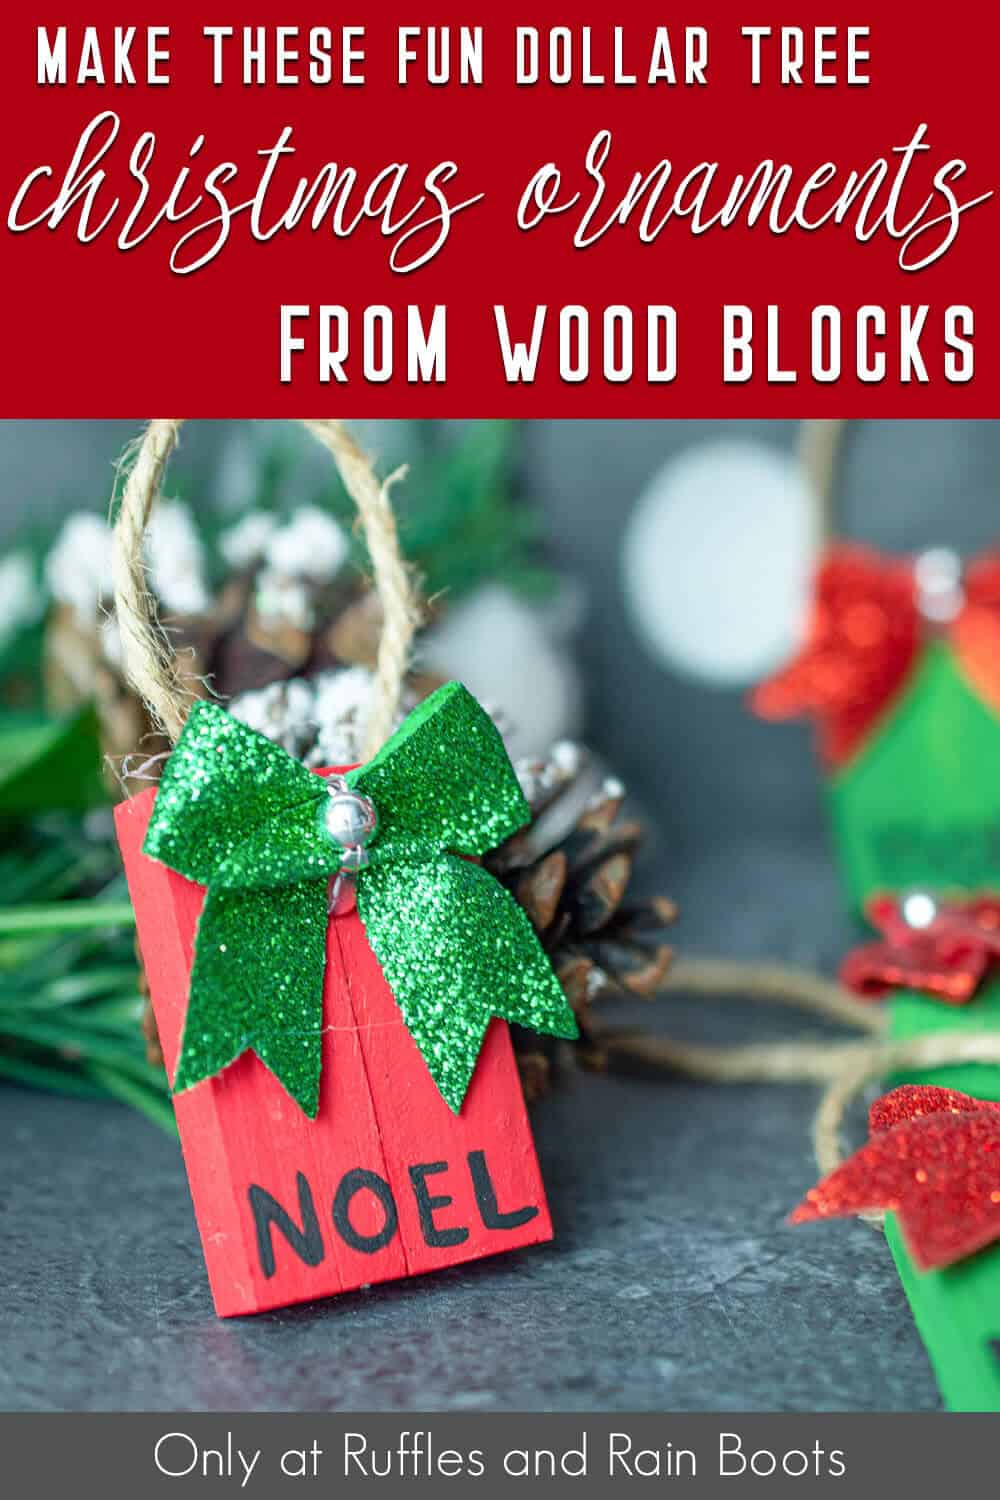 Dollar Tree wood block ornaments with text which reads make these fun dollar tree christmas ornaments from wood blocks